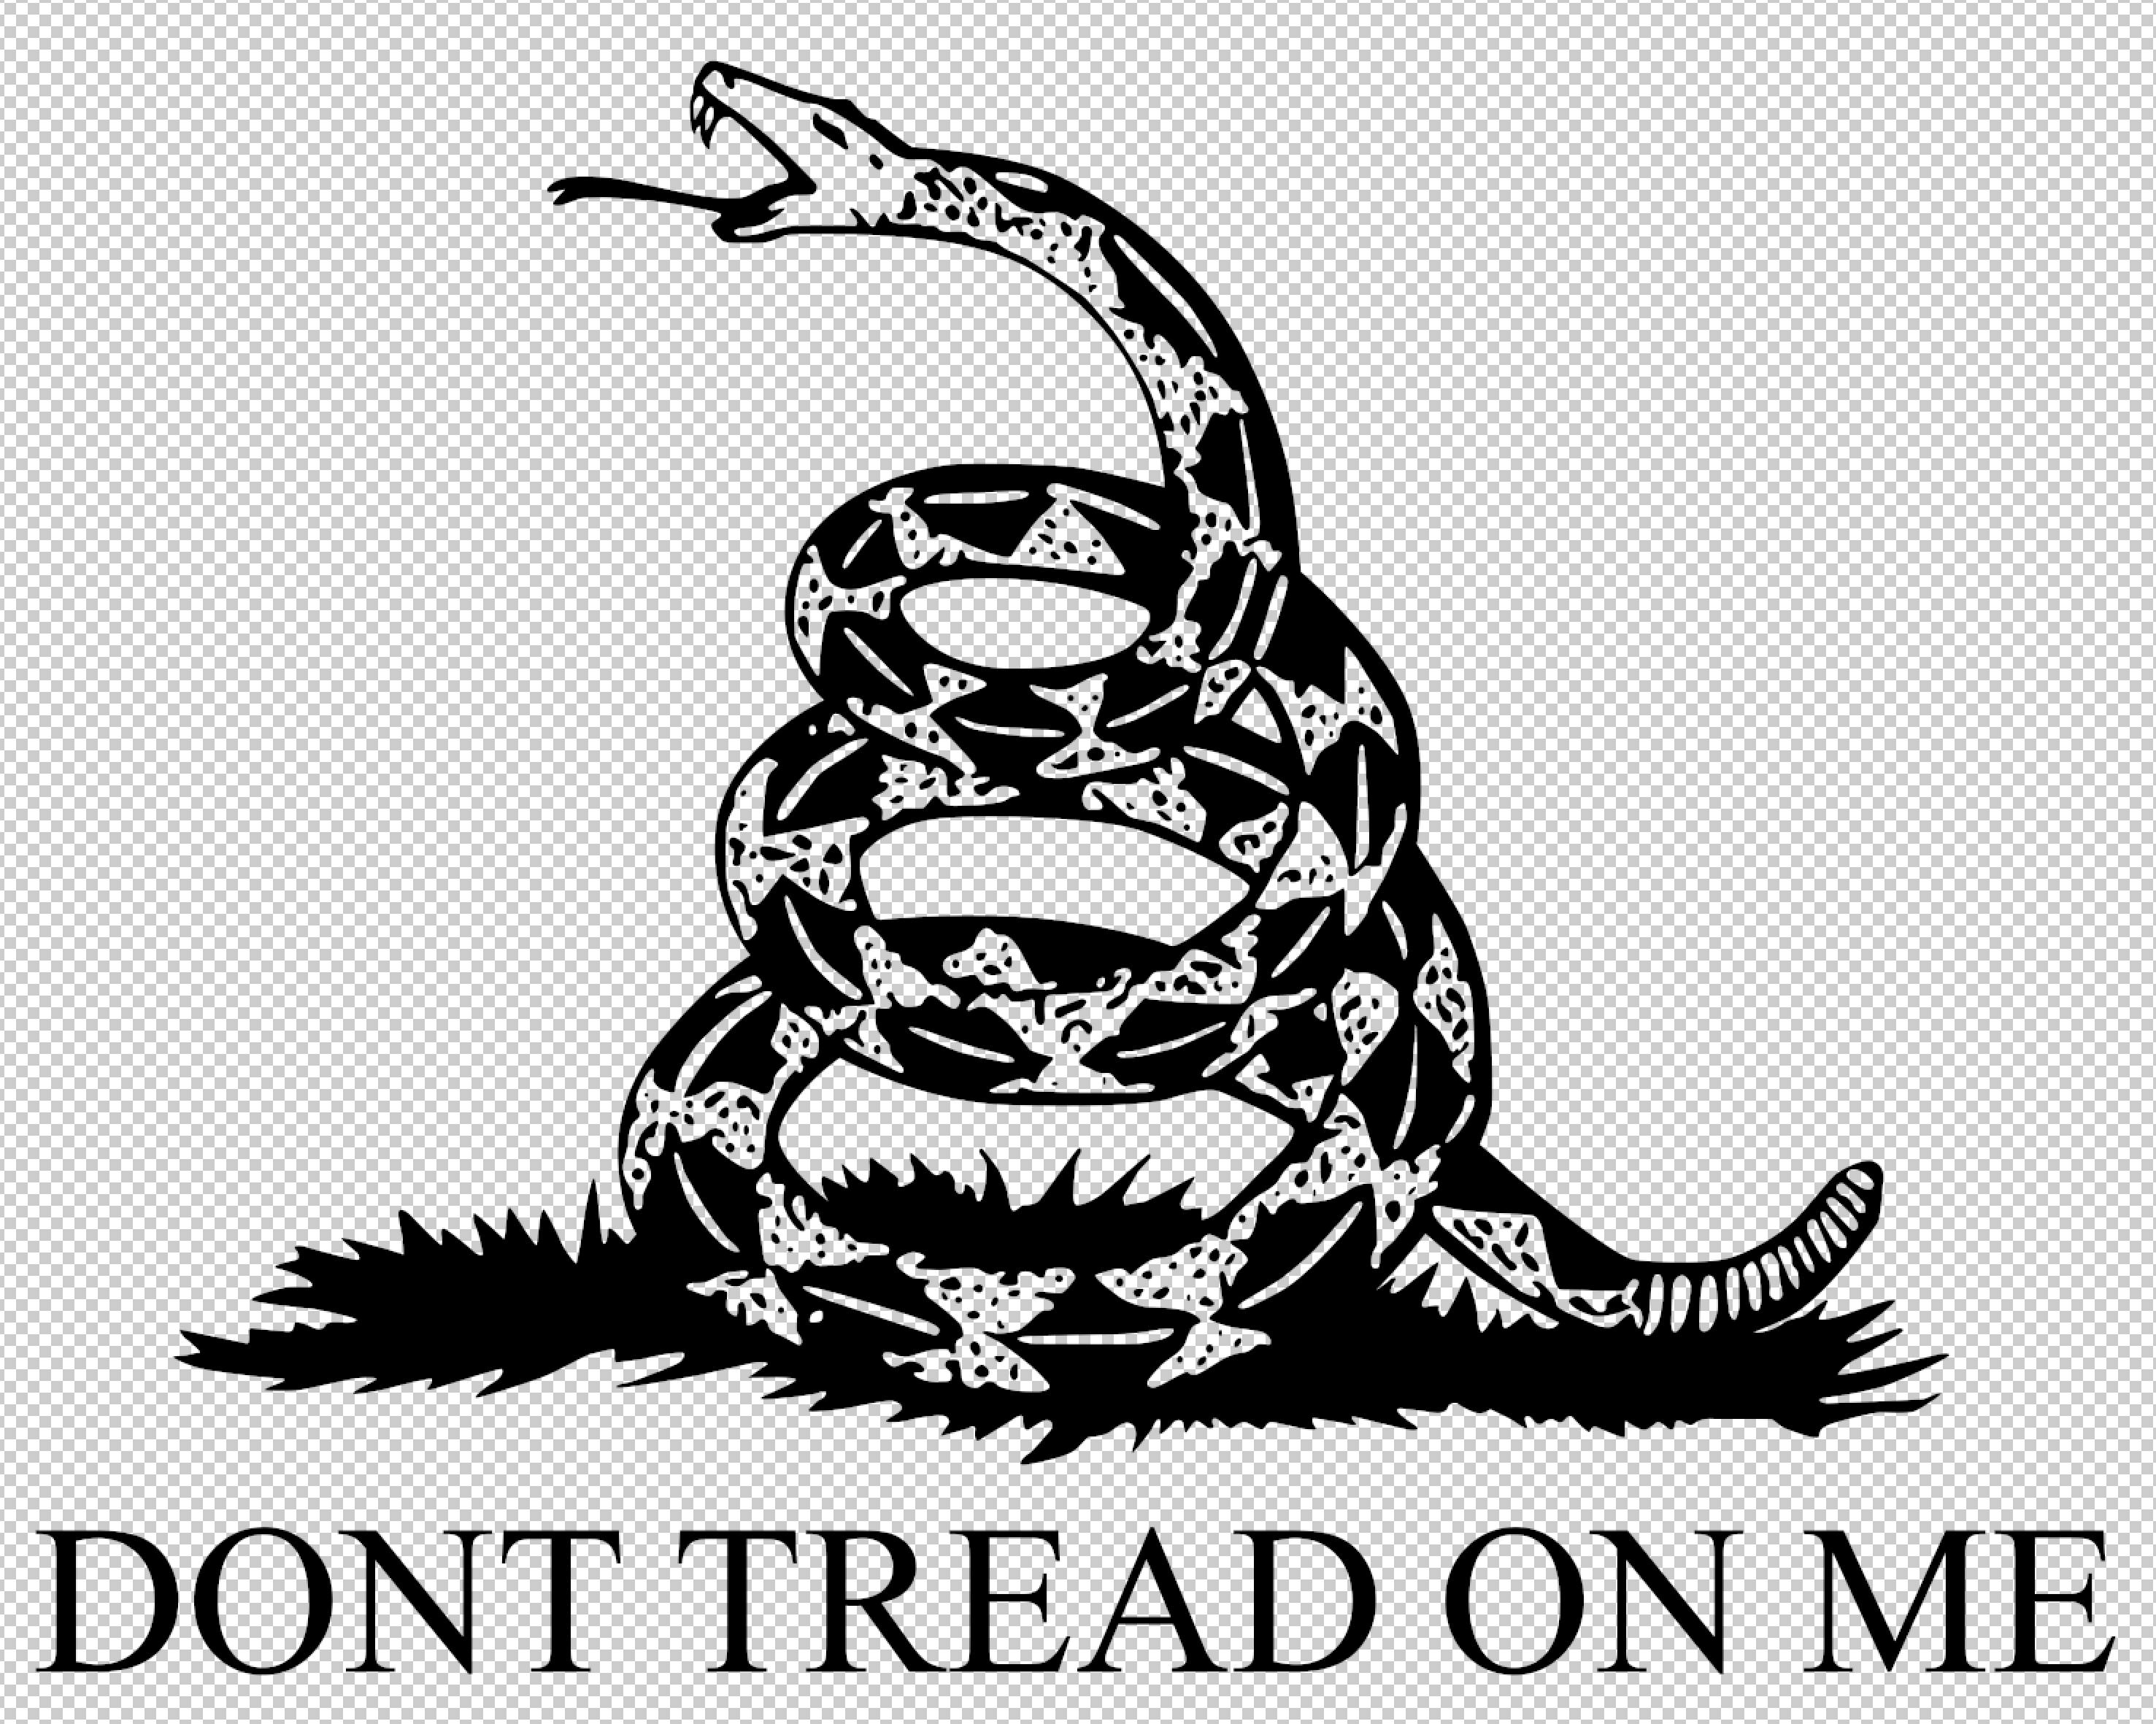 Dont tread on me clipart